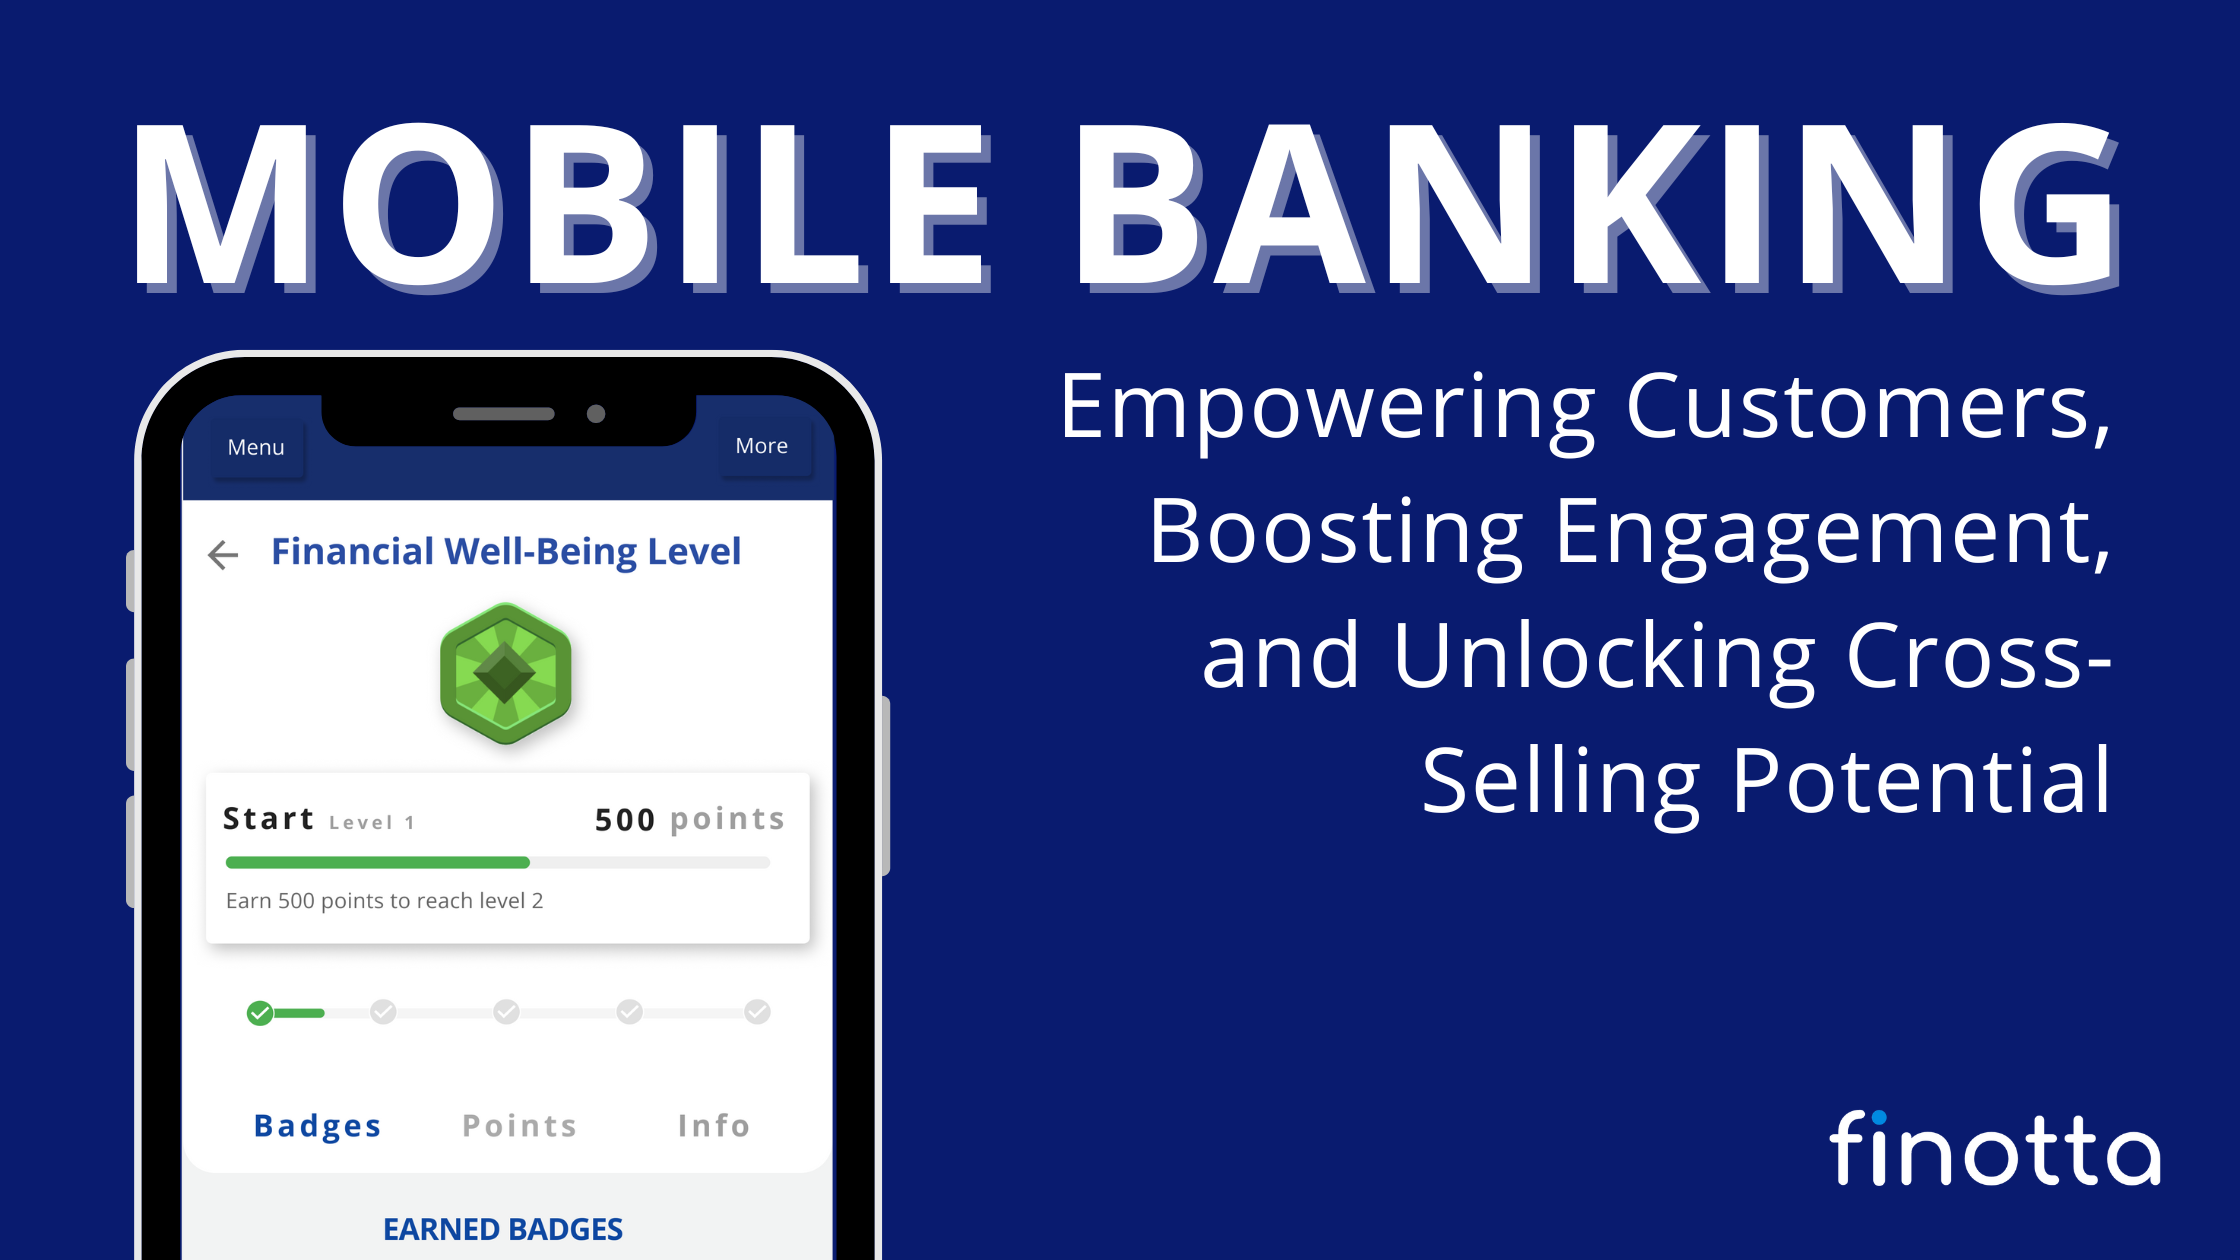 Mobile Banking: Empowering Customers, Boosting Engagement, and Unlocking Cross-Selling Potential